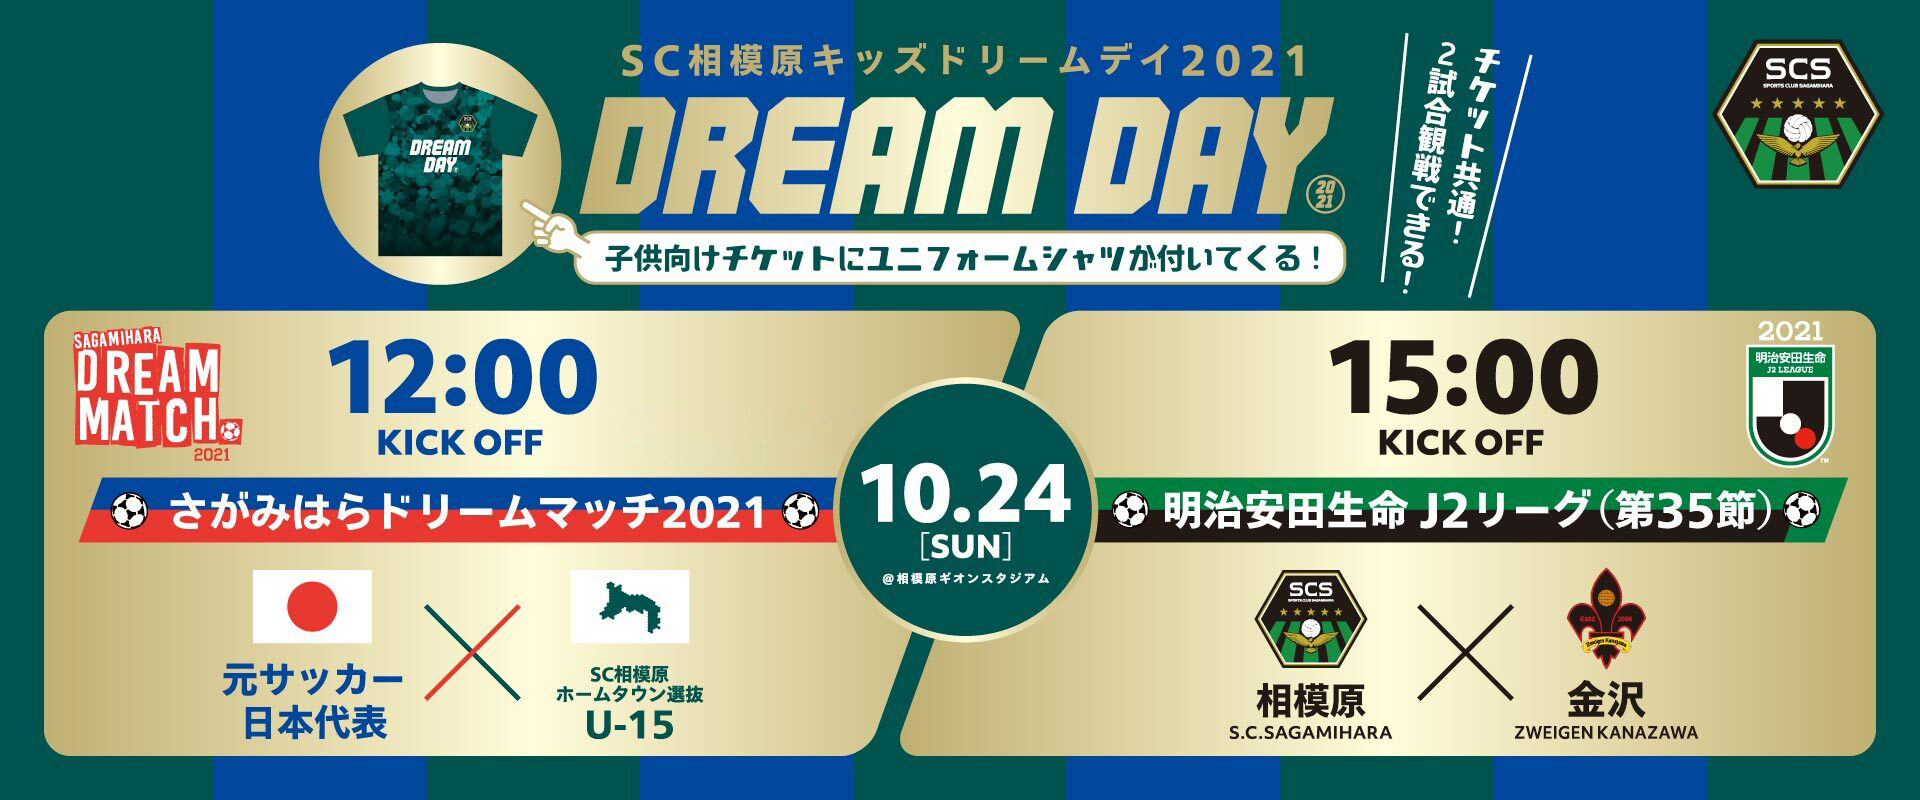 DREAM DAY_バナー（1019）.png